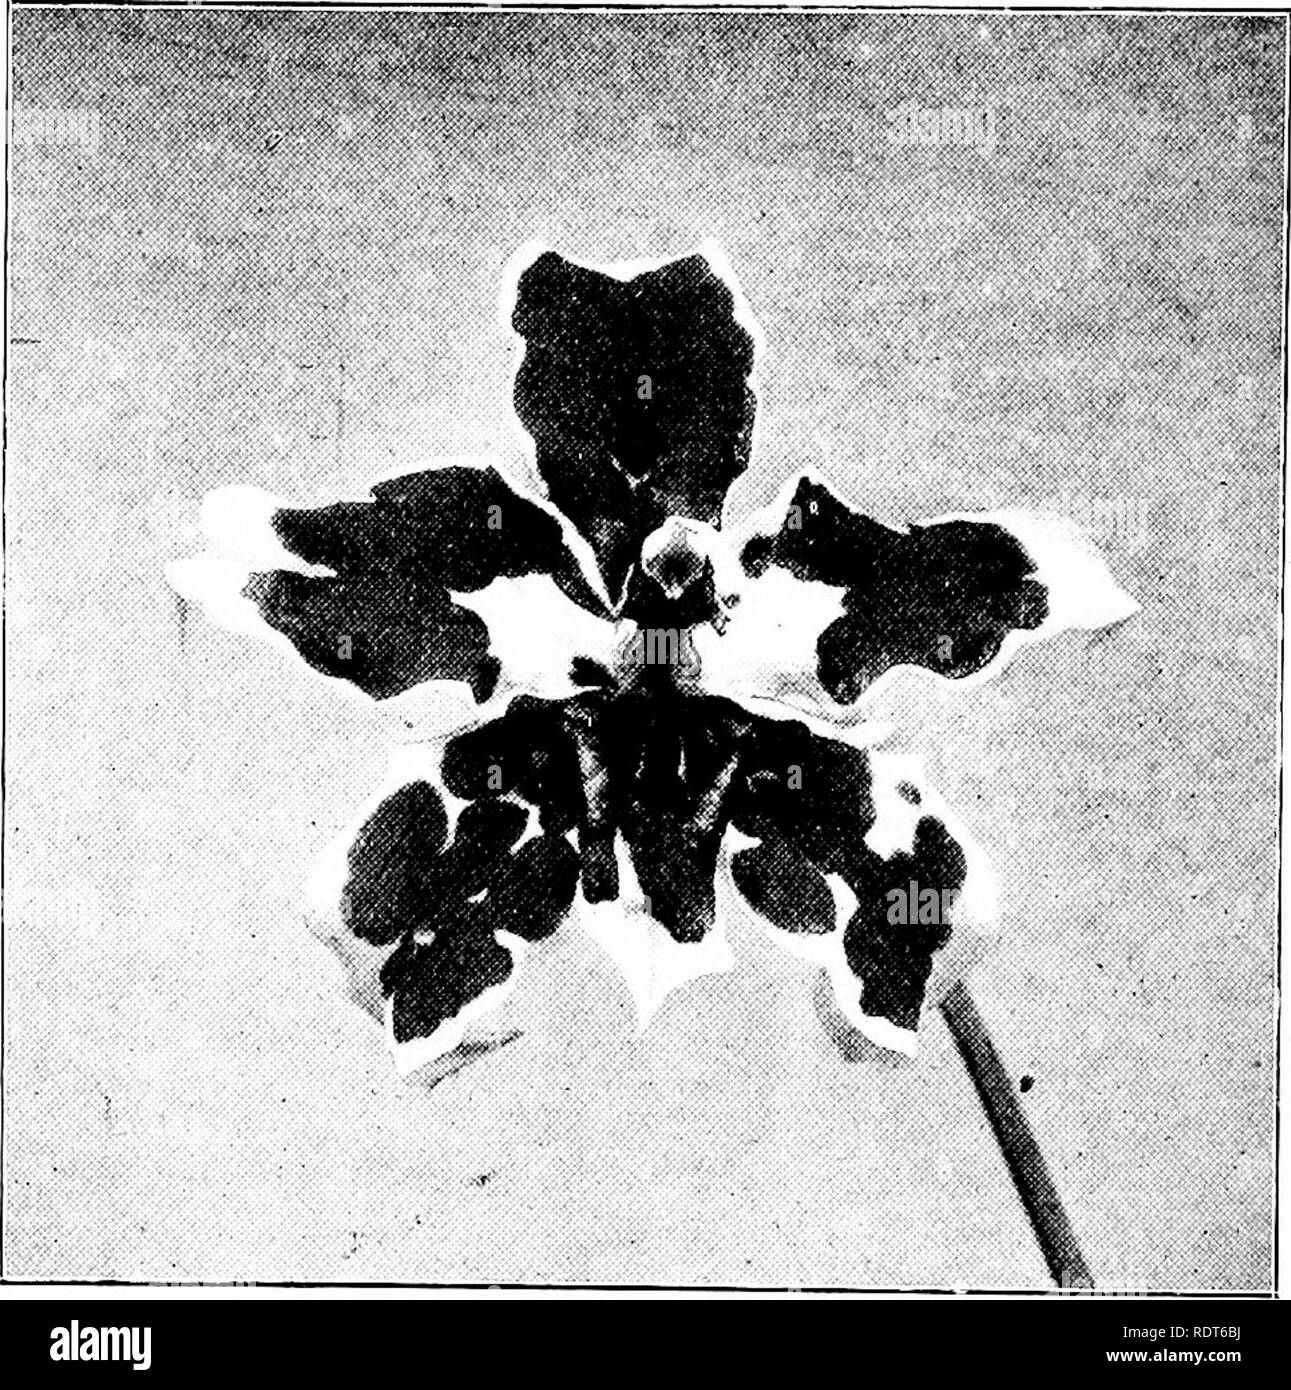 . The orchid stud-book: an enumeration of hybrid orchids of artificial origin, with their parents, raisers, date of first flowering, references to descriptions and figures, and synonymy. With an historical introduction and 120 figures and a chapter on hybridising and raising orchids from seed. Orchids. 282 THE ORCHID STUD-BOOK. [Part II. Suppl. â Ob. 0. X Albertii (X armainvillierense x Denisona;).âSander, 1907. O. X Prince Albert, G.C. 1907, i. 289 ; O.R. 1907, 172. - Sander. O. X laudatum, Rev. H. Beige, 1907, 366.âVuylsteke. Oc. 0. X Aliceae (Edwardii x spectabile), G.C. 1907, i. 26, f. 15, Stock Photo